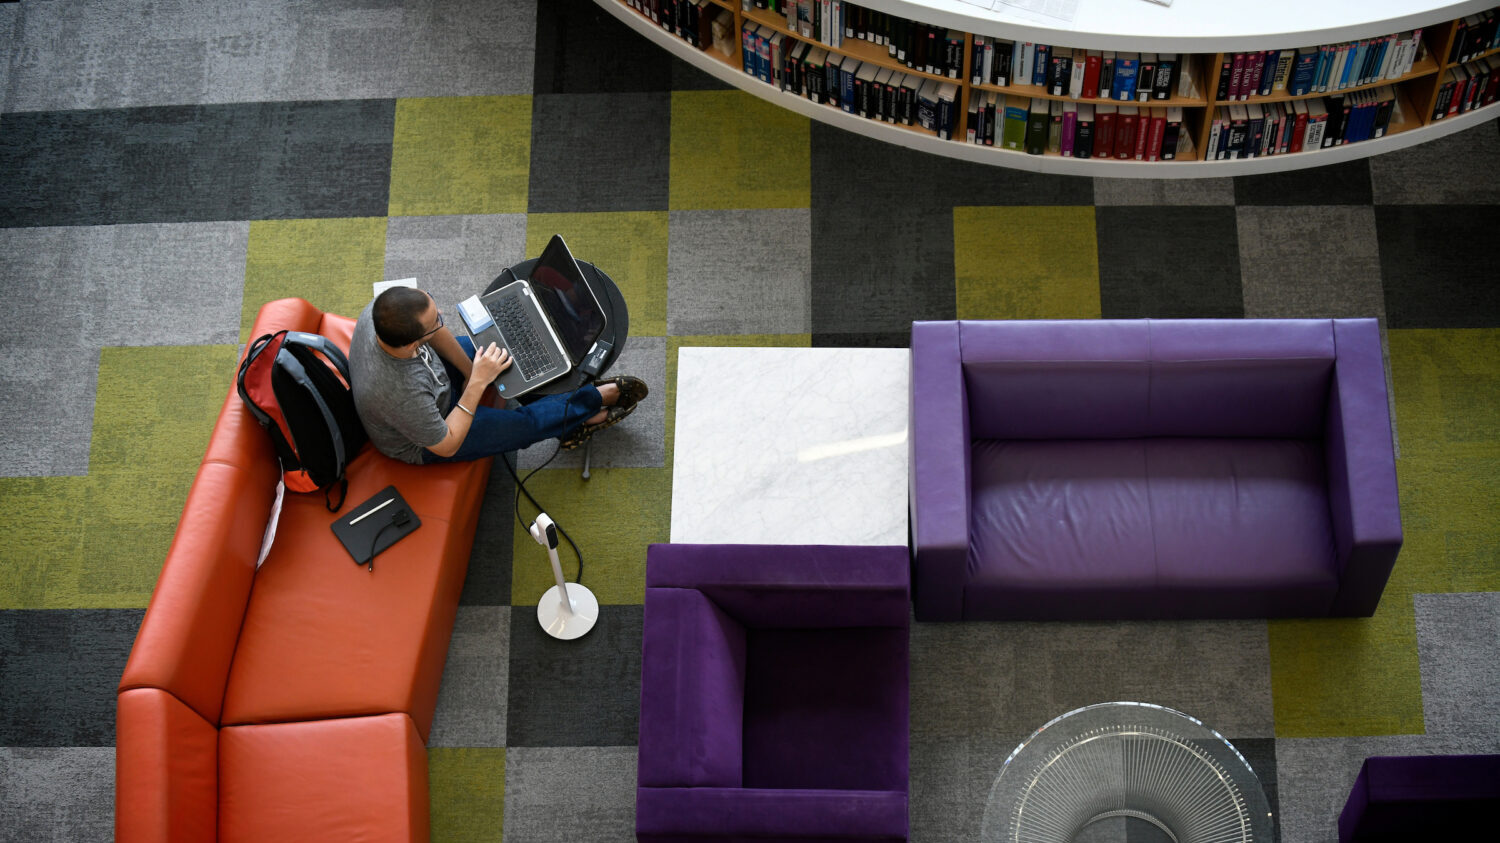 Students work and study in the Hunt Library.